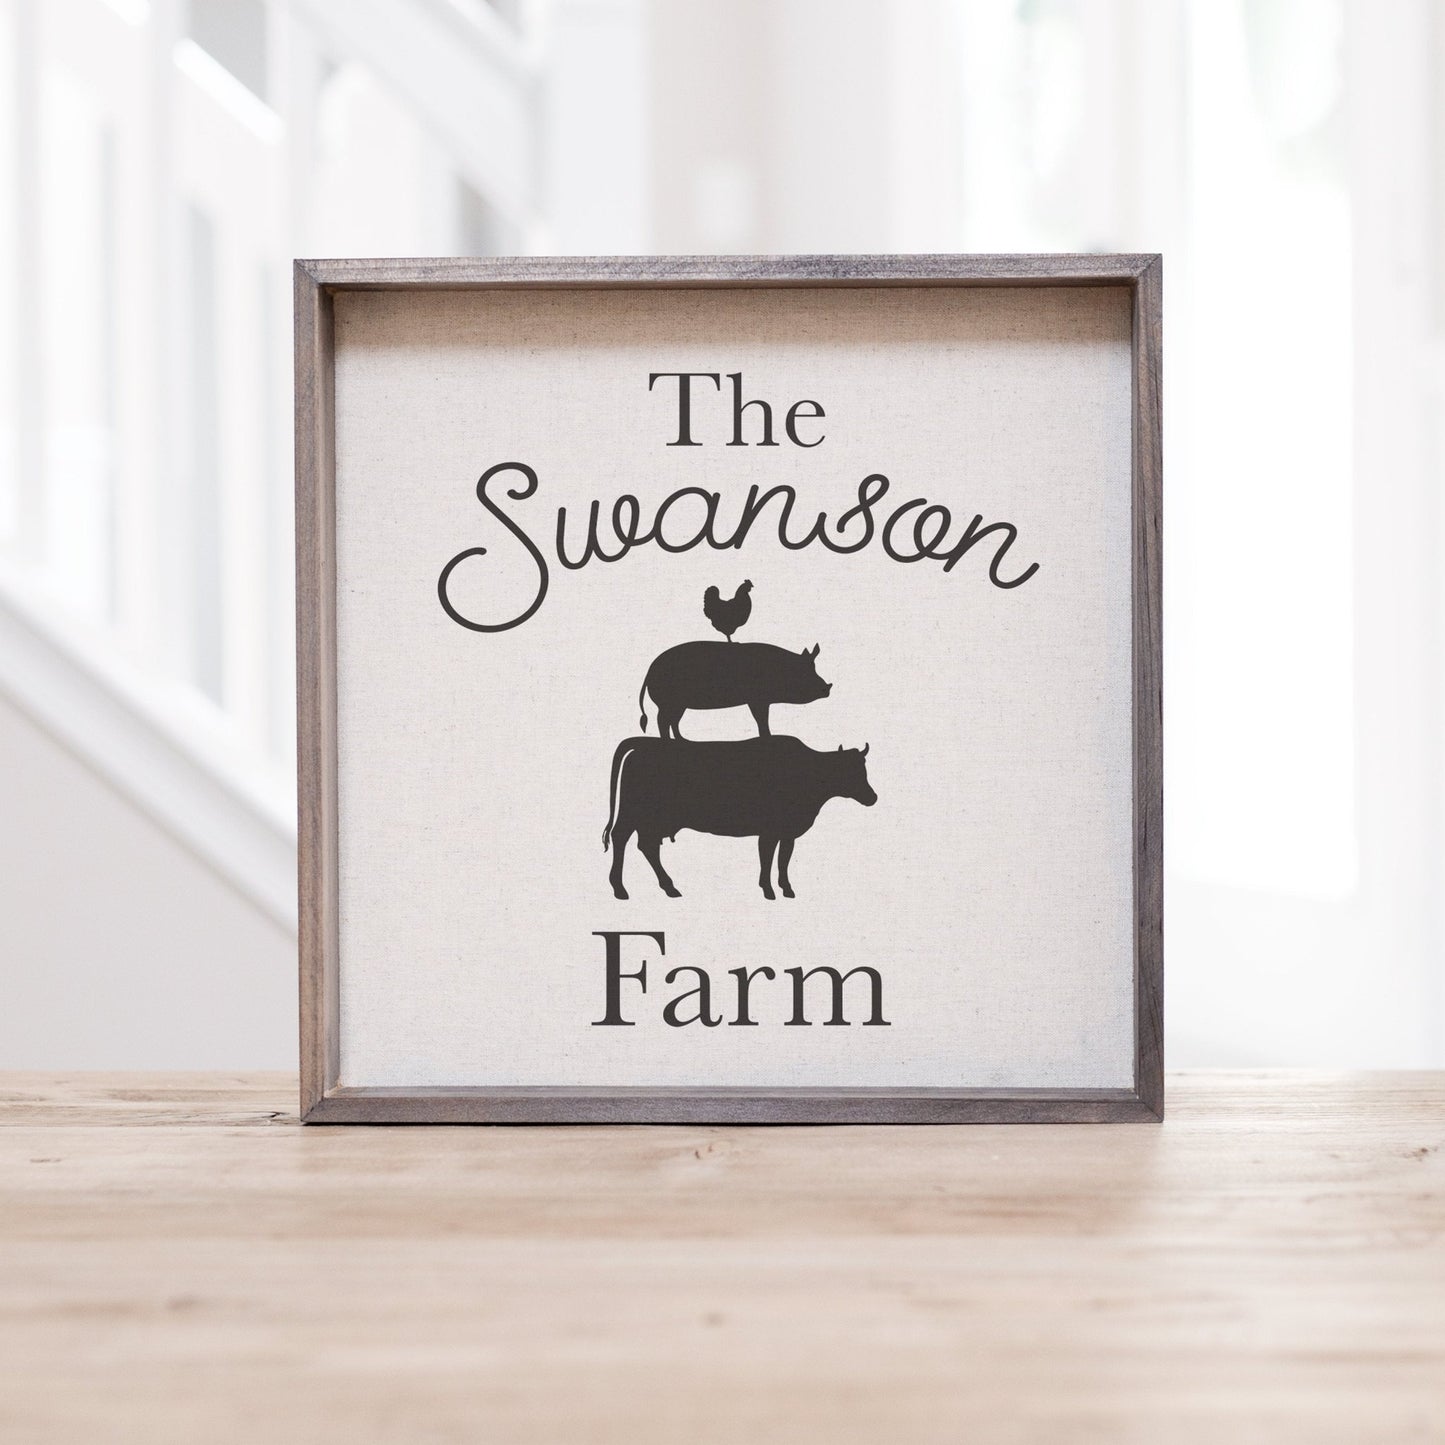 Personalized Family Farm Kitchen Wood Sign | Farmhouse Family Kitchen Sign | Bridal Shower Gift Idea | Personalized Farmhouse Kitchen Decor